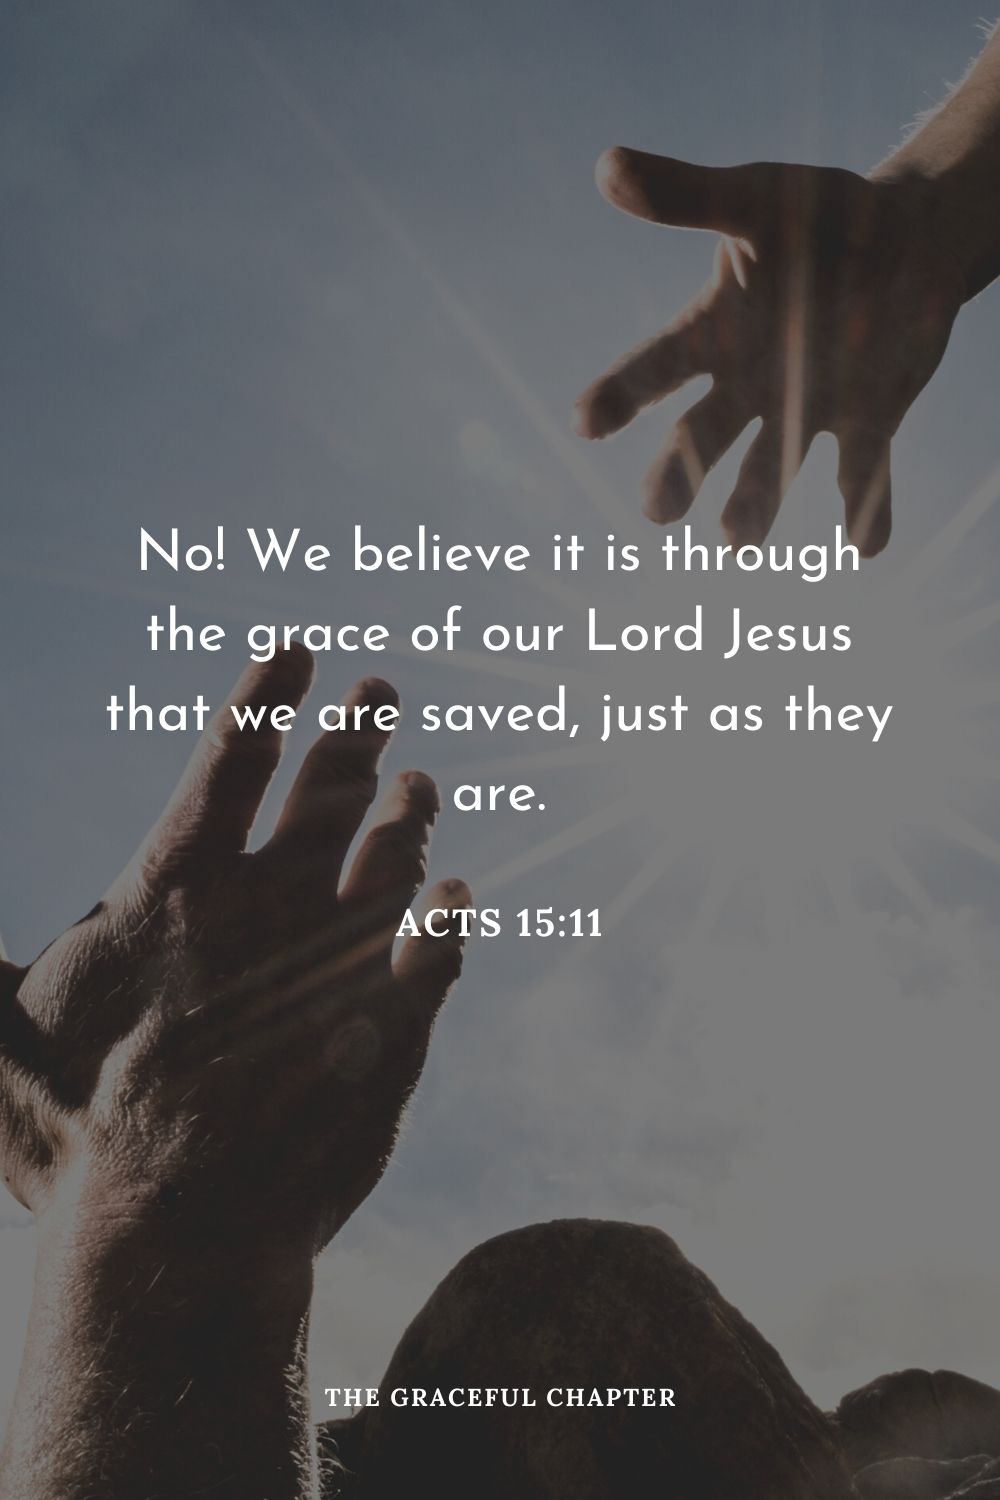 No! We believe it is through the grace of our Lord Jesus that we are saved, just as they are.